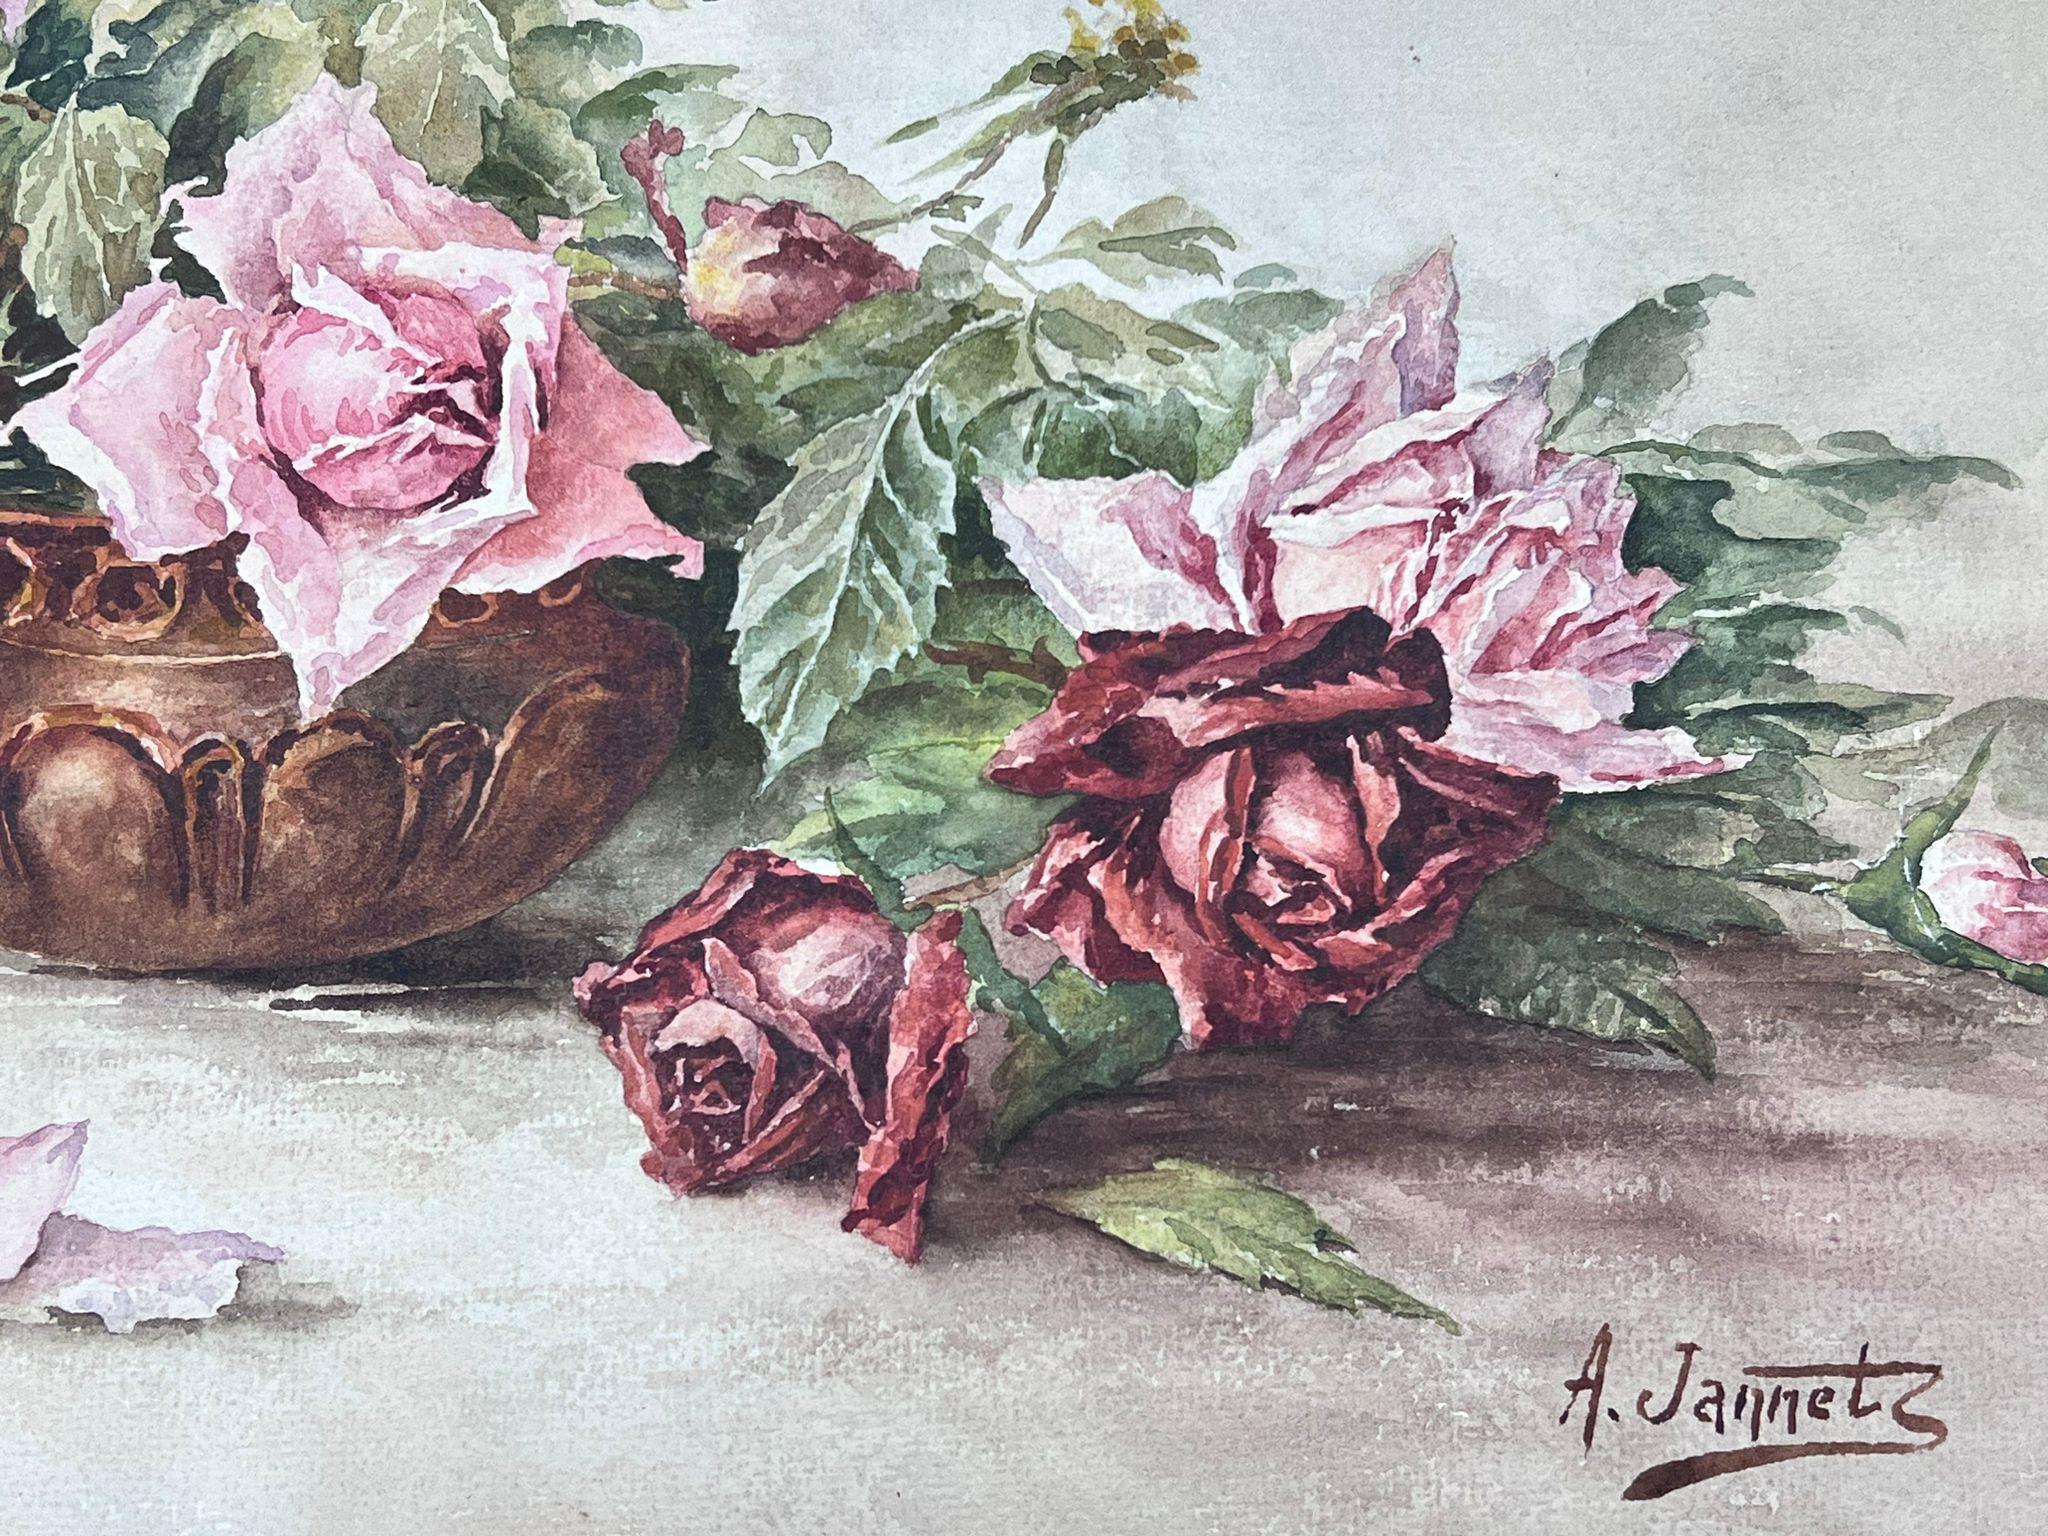 Still Life of Roses
French artist, circa 1900's
signed watercolour on board, unframed
board: 13 x 18.5 inches
provenance: private collection, France
condition: very good and sound condition, slight staining to the edges.